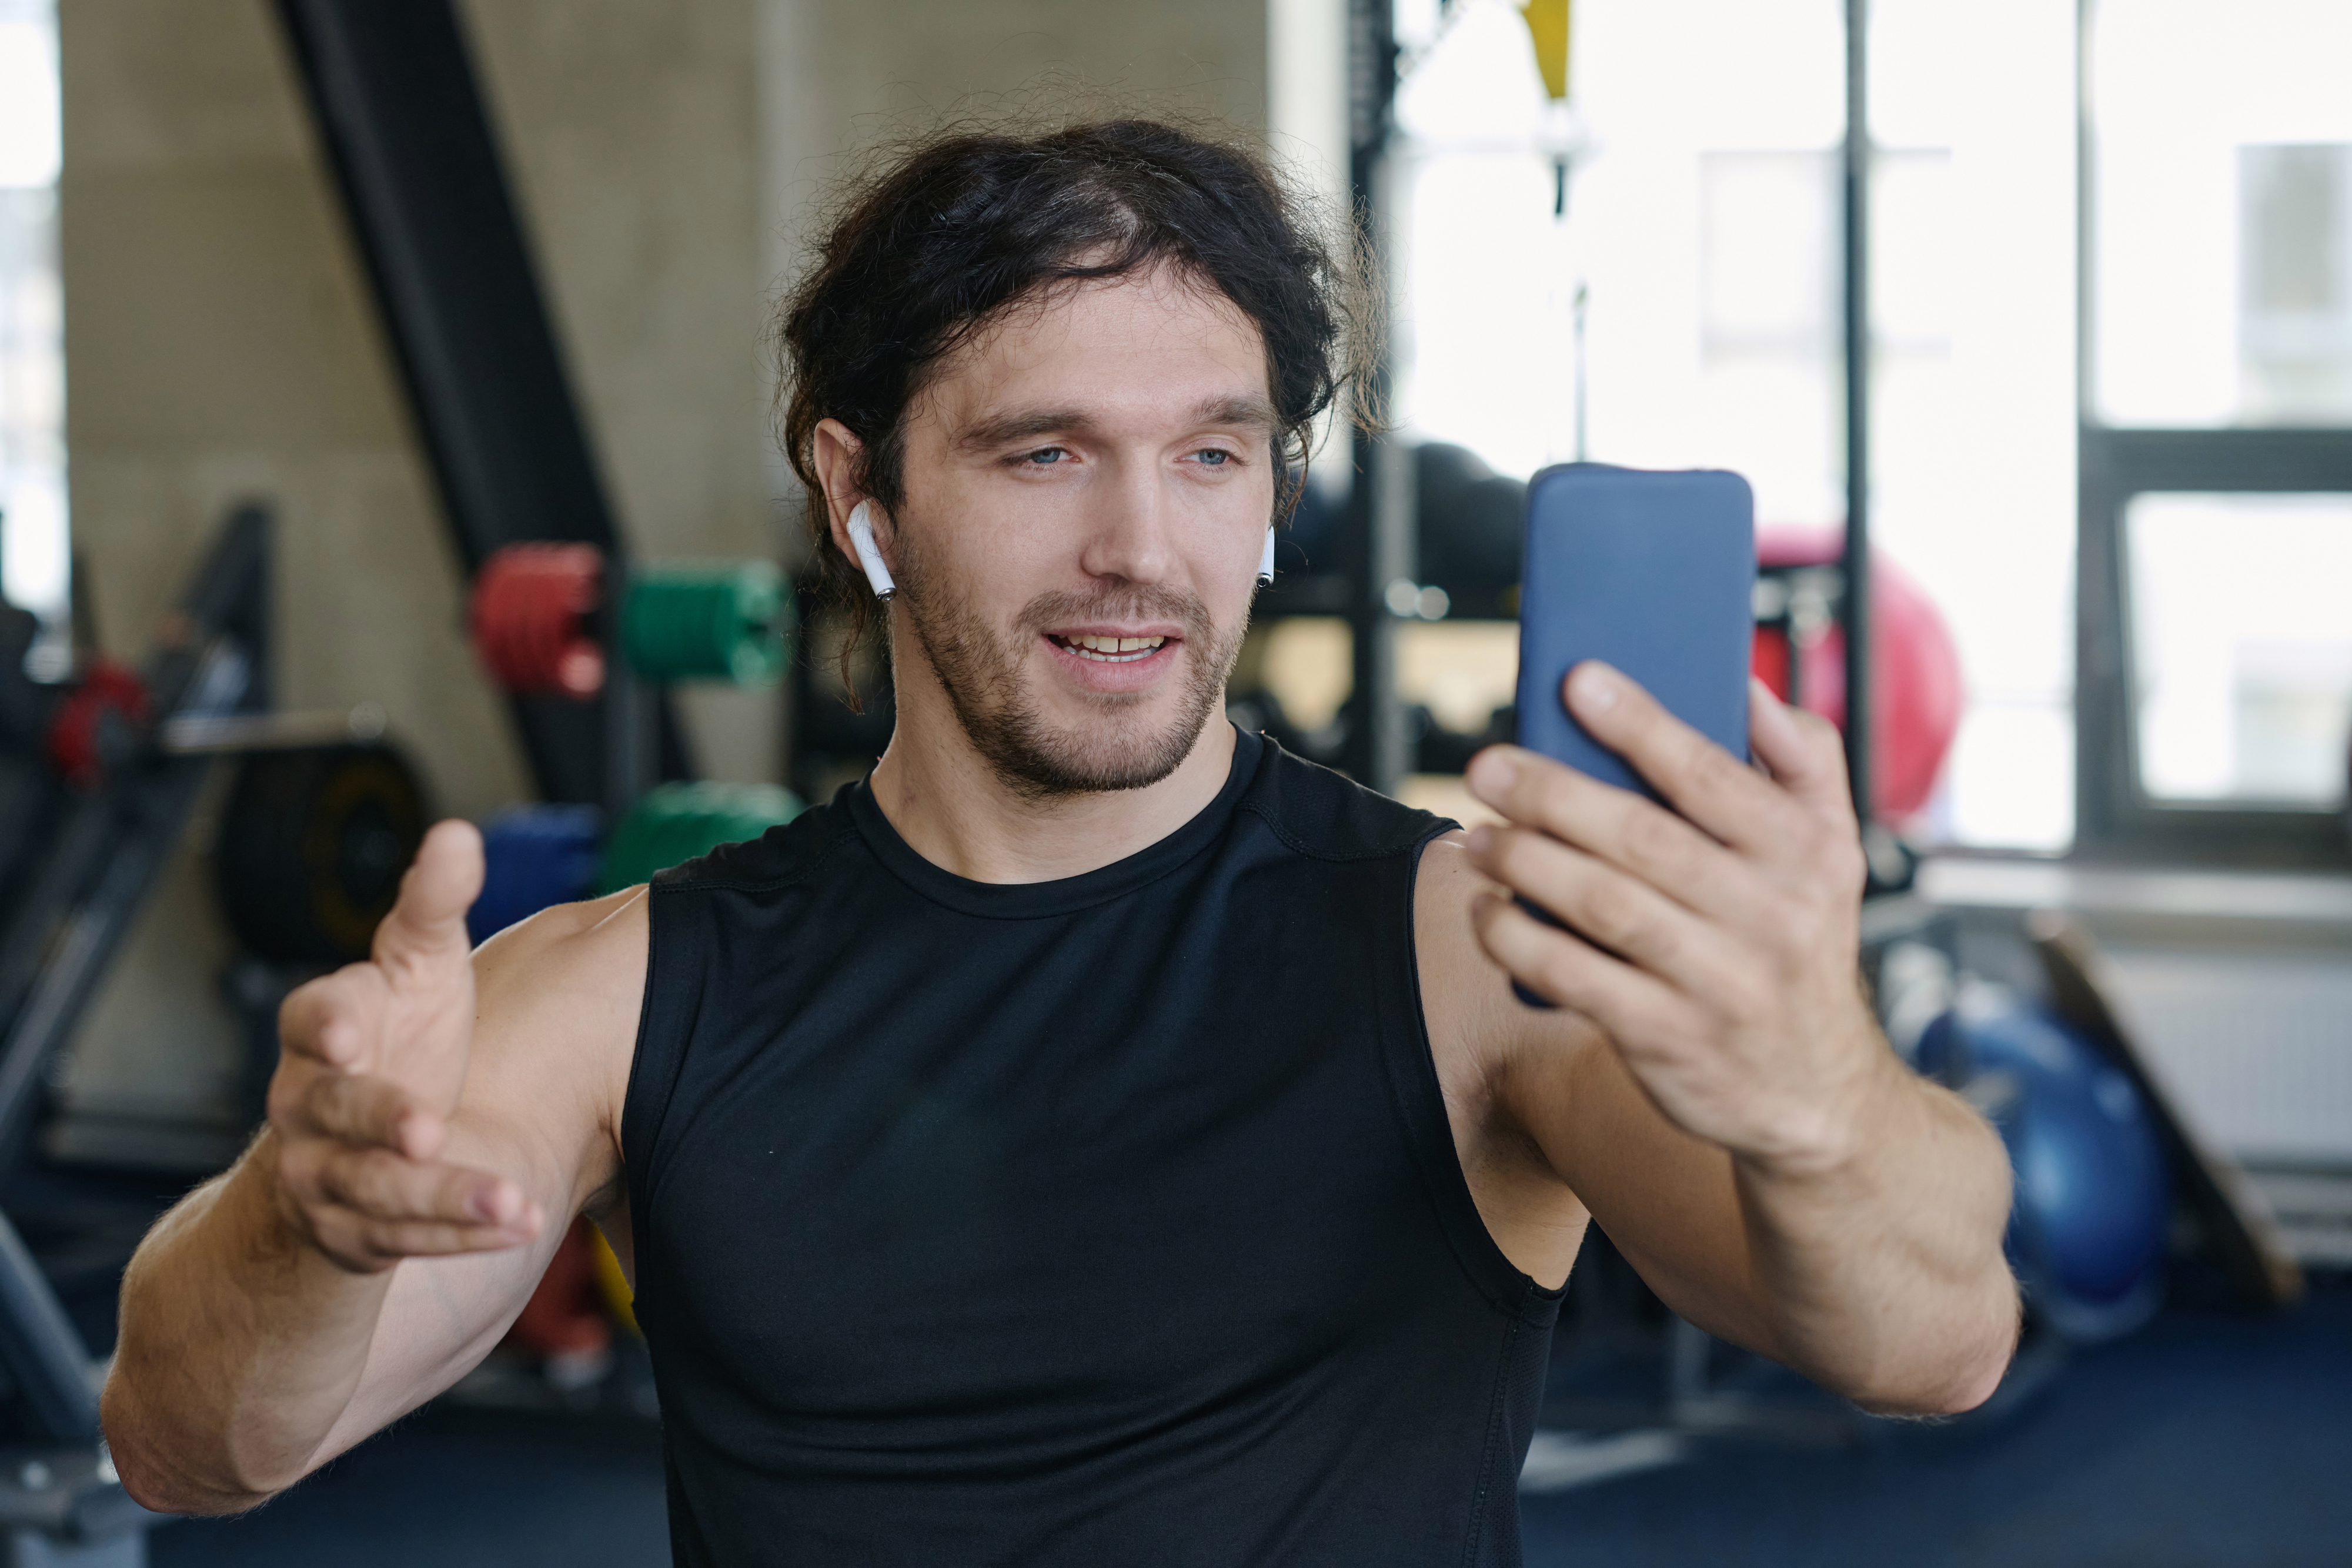 A man in sleeveless top taking a recording himself with his phone in a gym